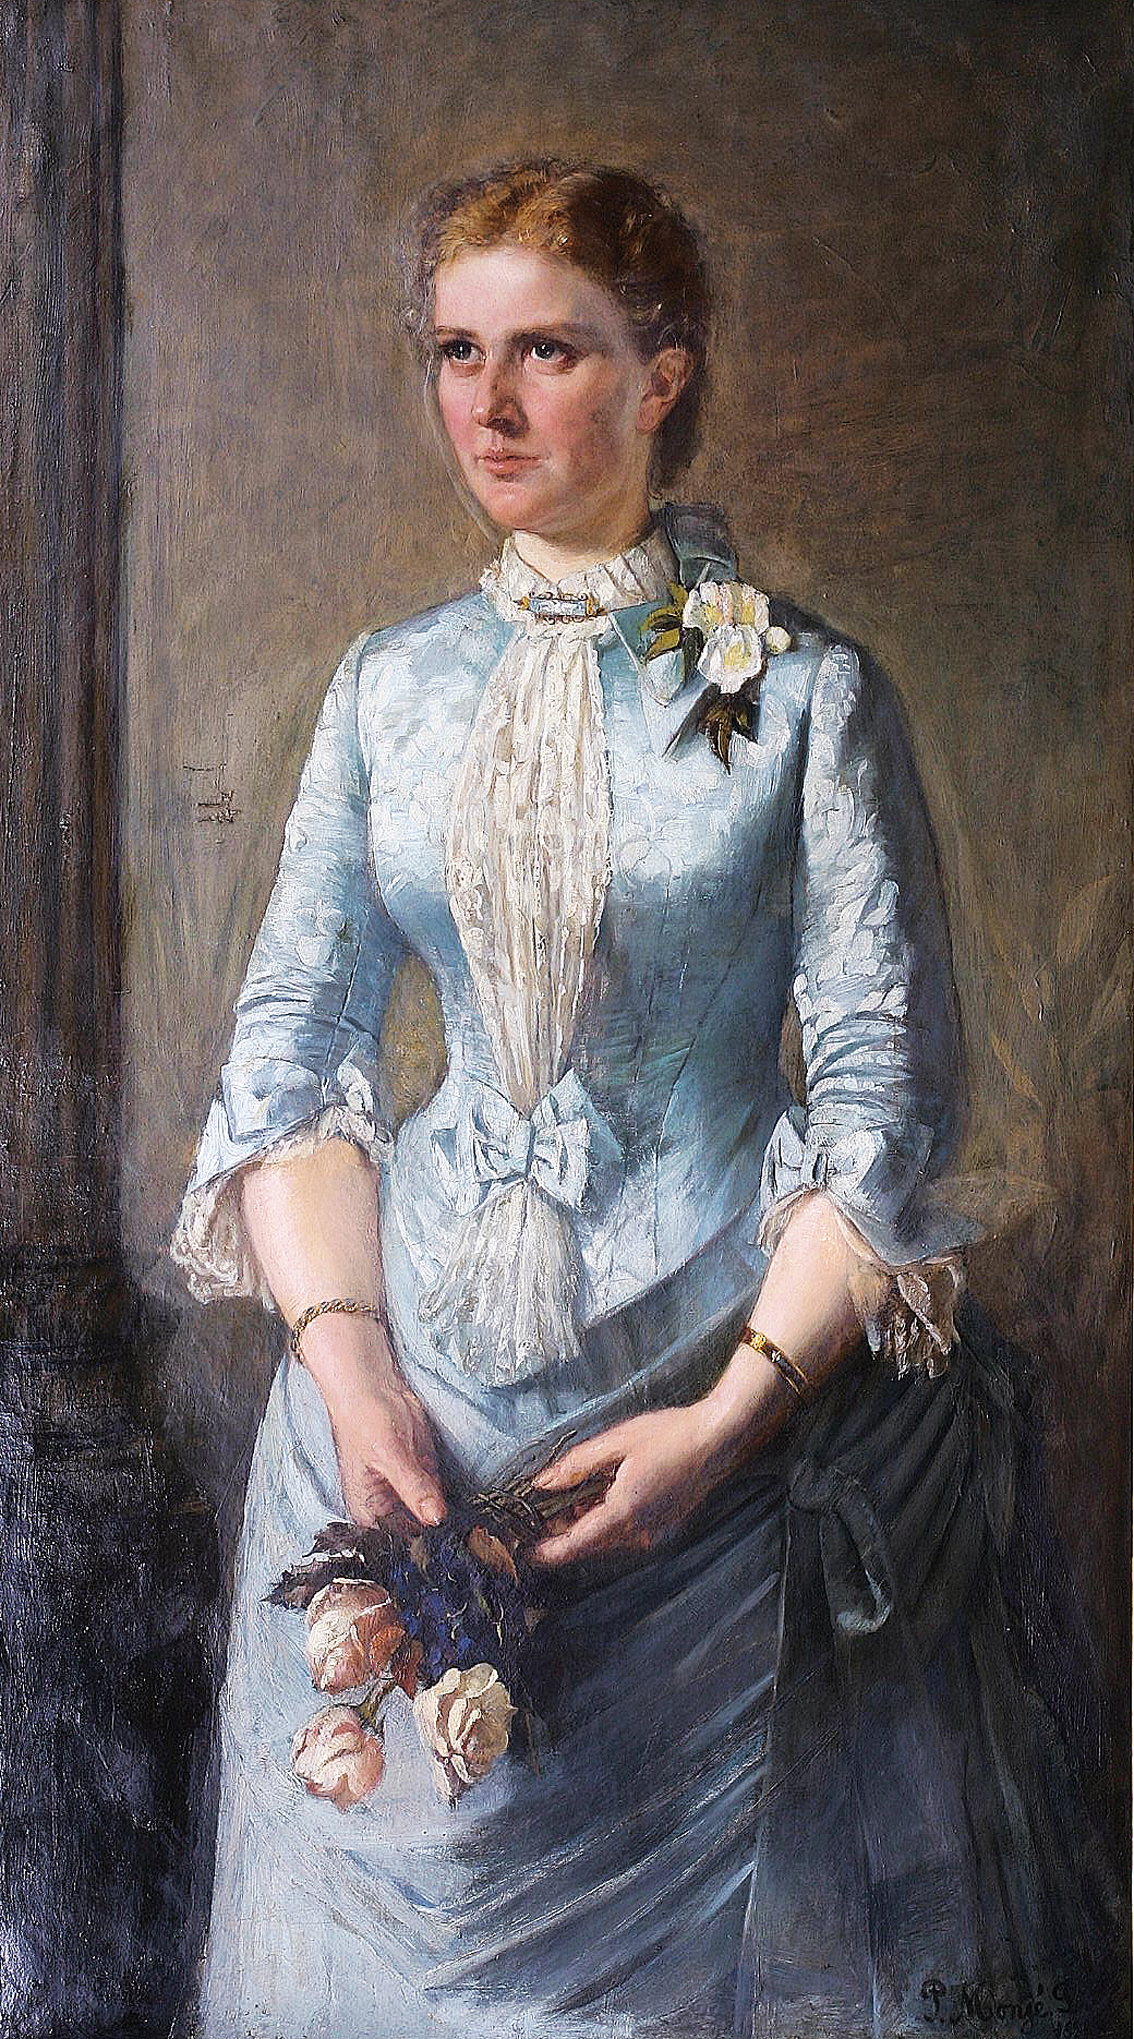 A portrait of a young lady